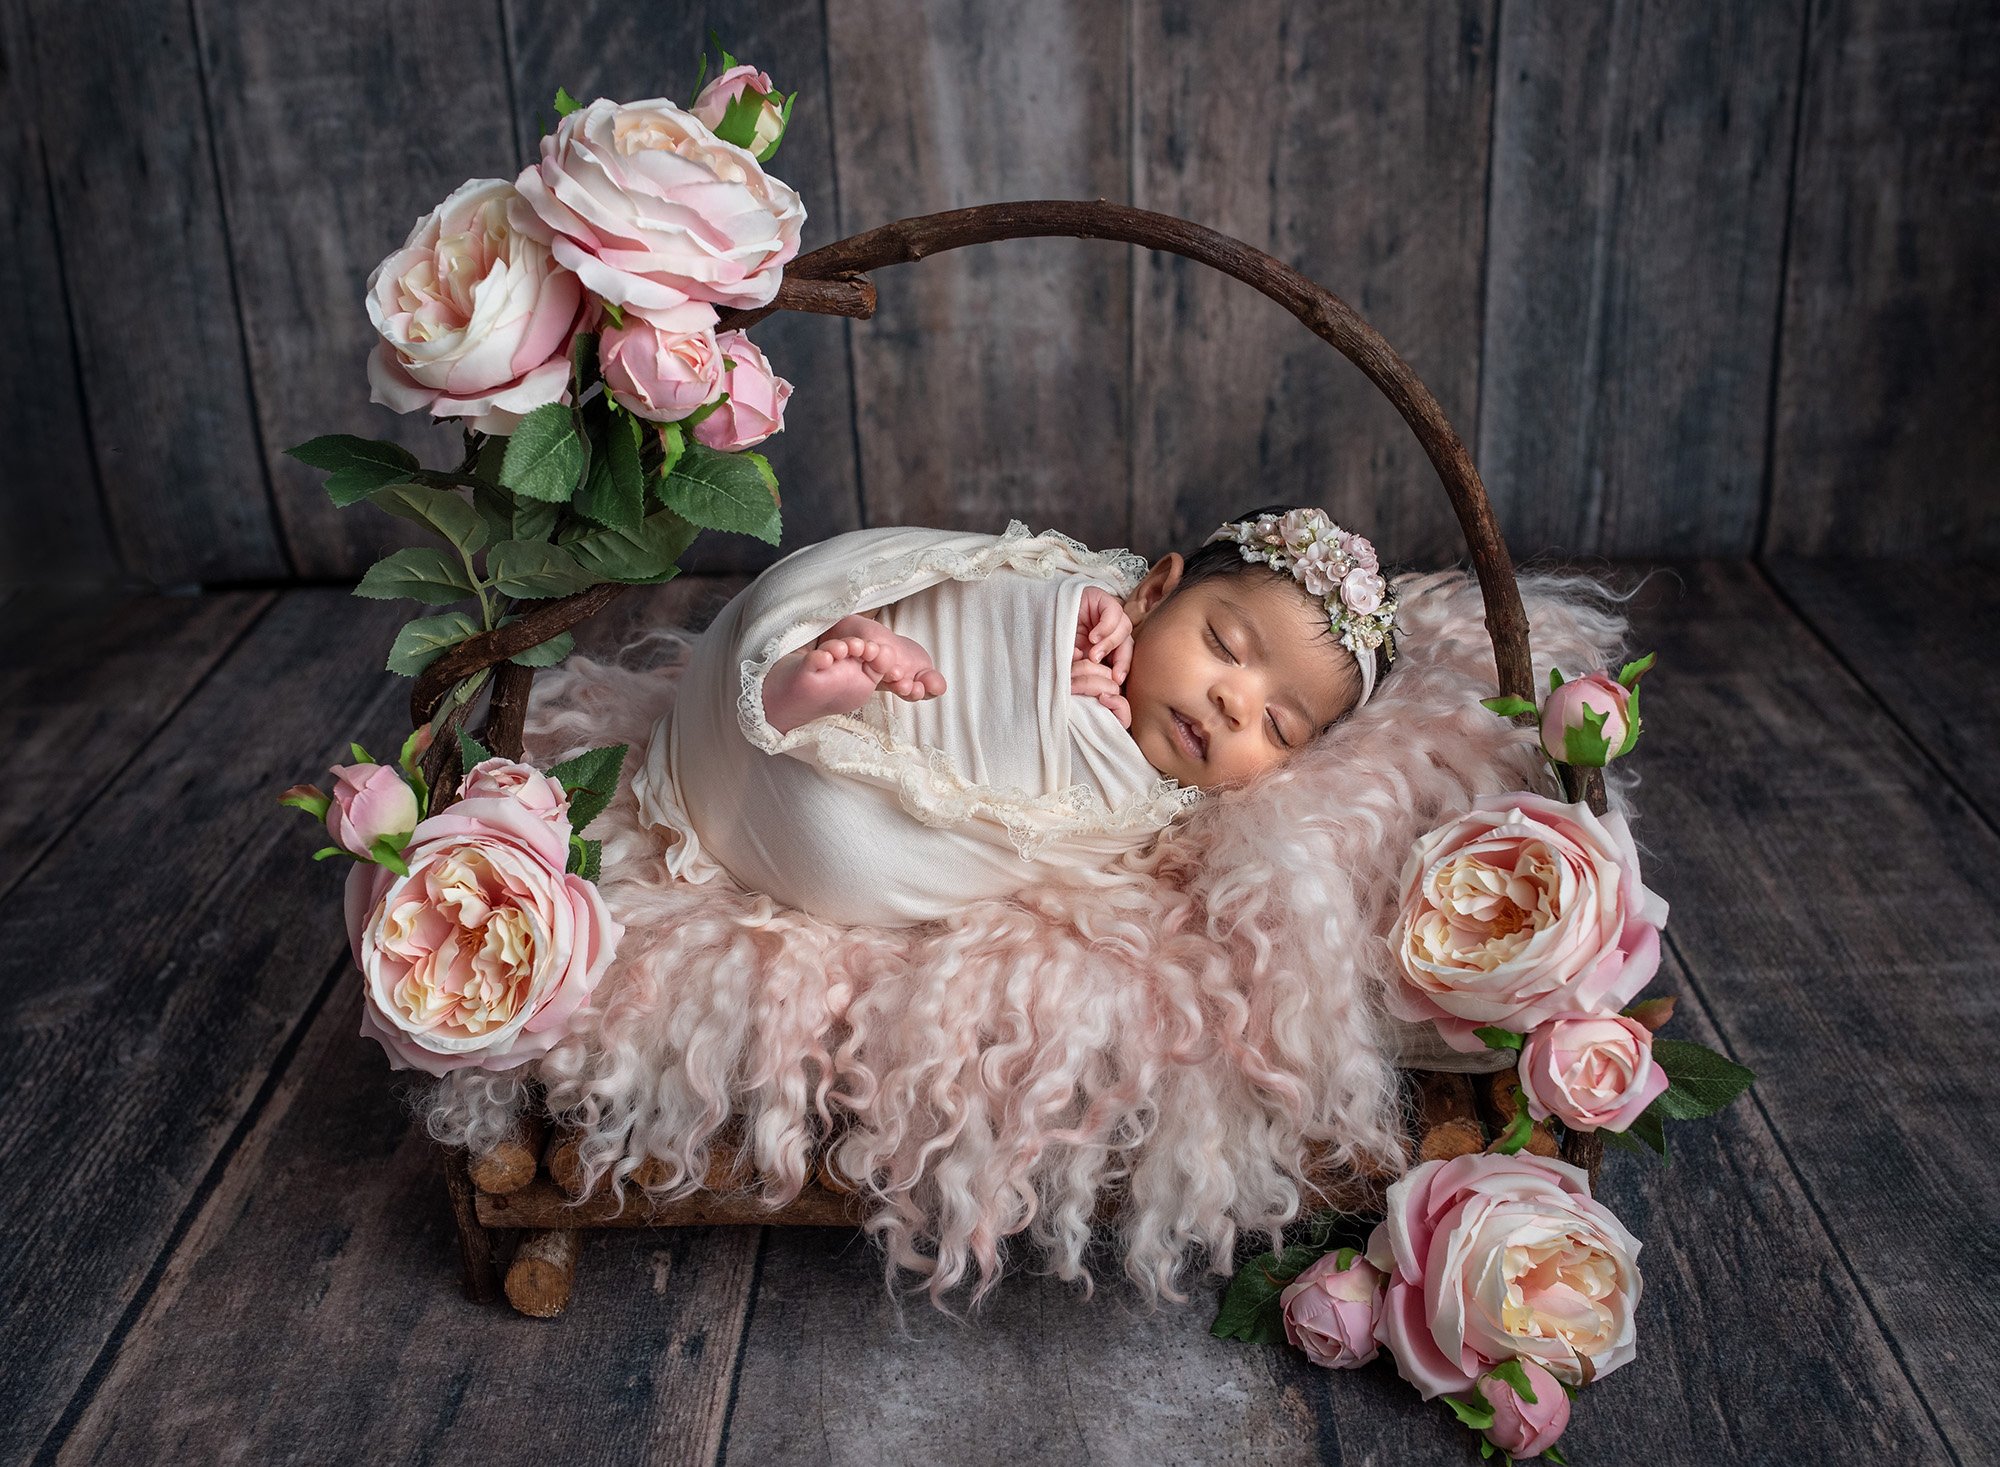 newborn baby girl swaddled in lace wrap sleeping on top of rustic wooden bed with pink fuzzy blanket surrounded by pink flowers on wooden background